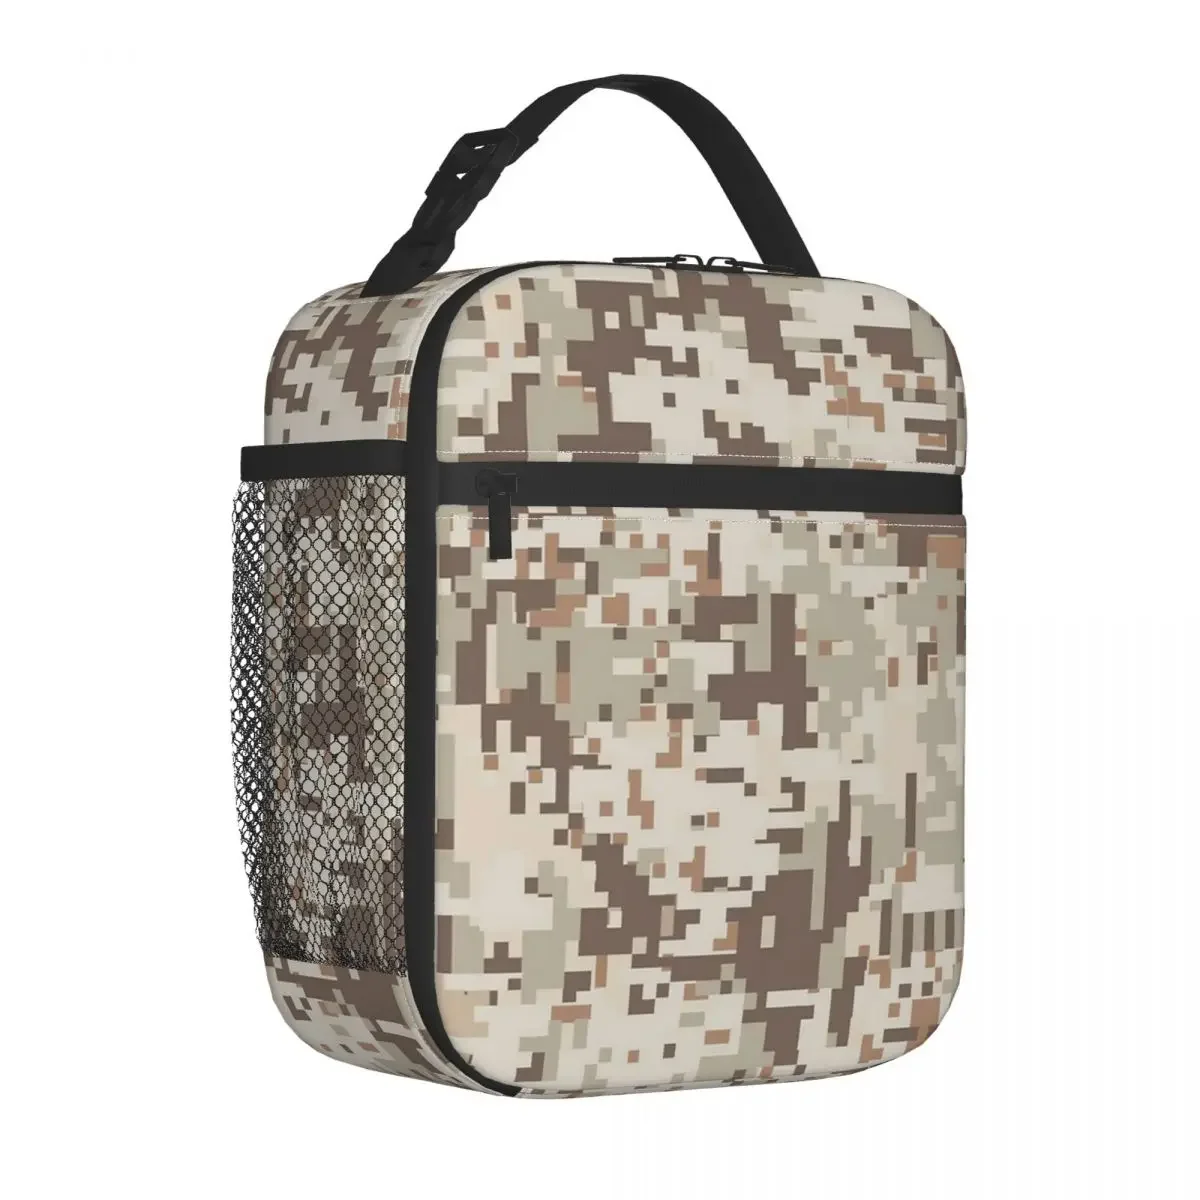 

Desert Camo Insulated Lunch Bag Multicam Military Lunch Container Reusable Cooler Thermal Lunch Box Picnic